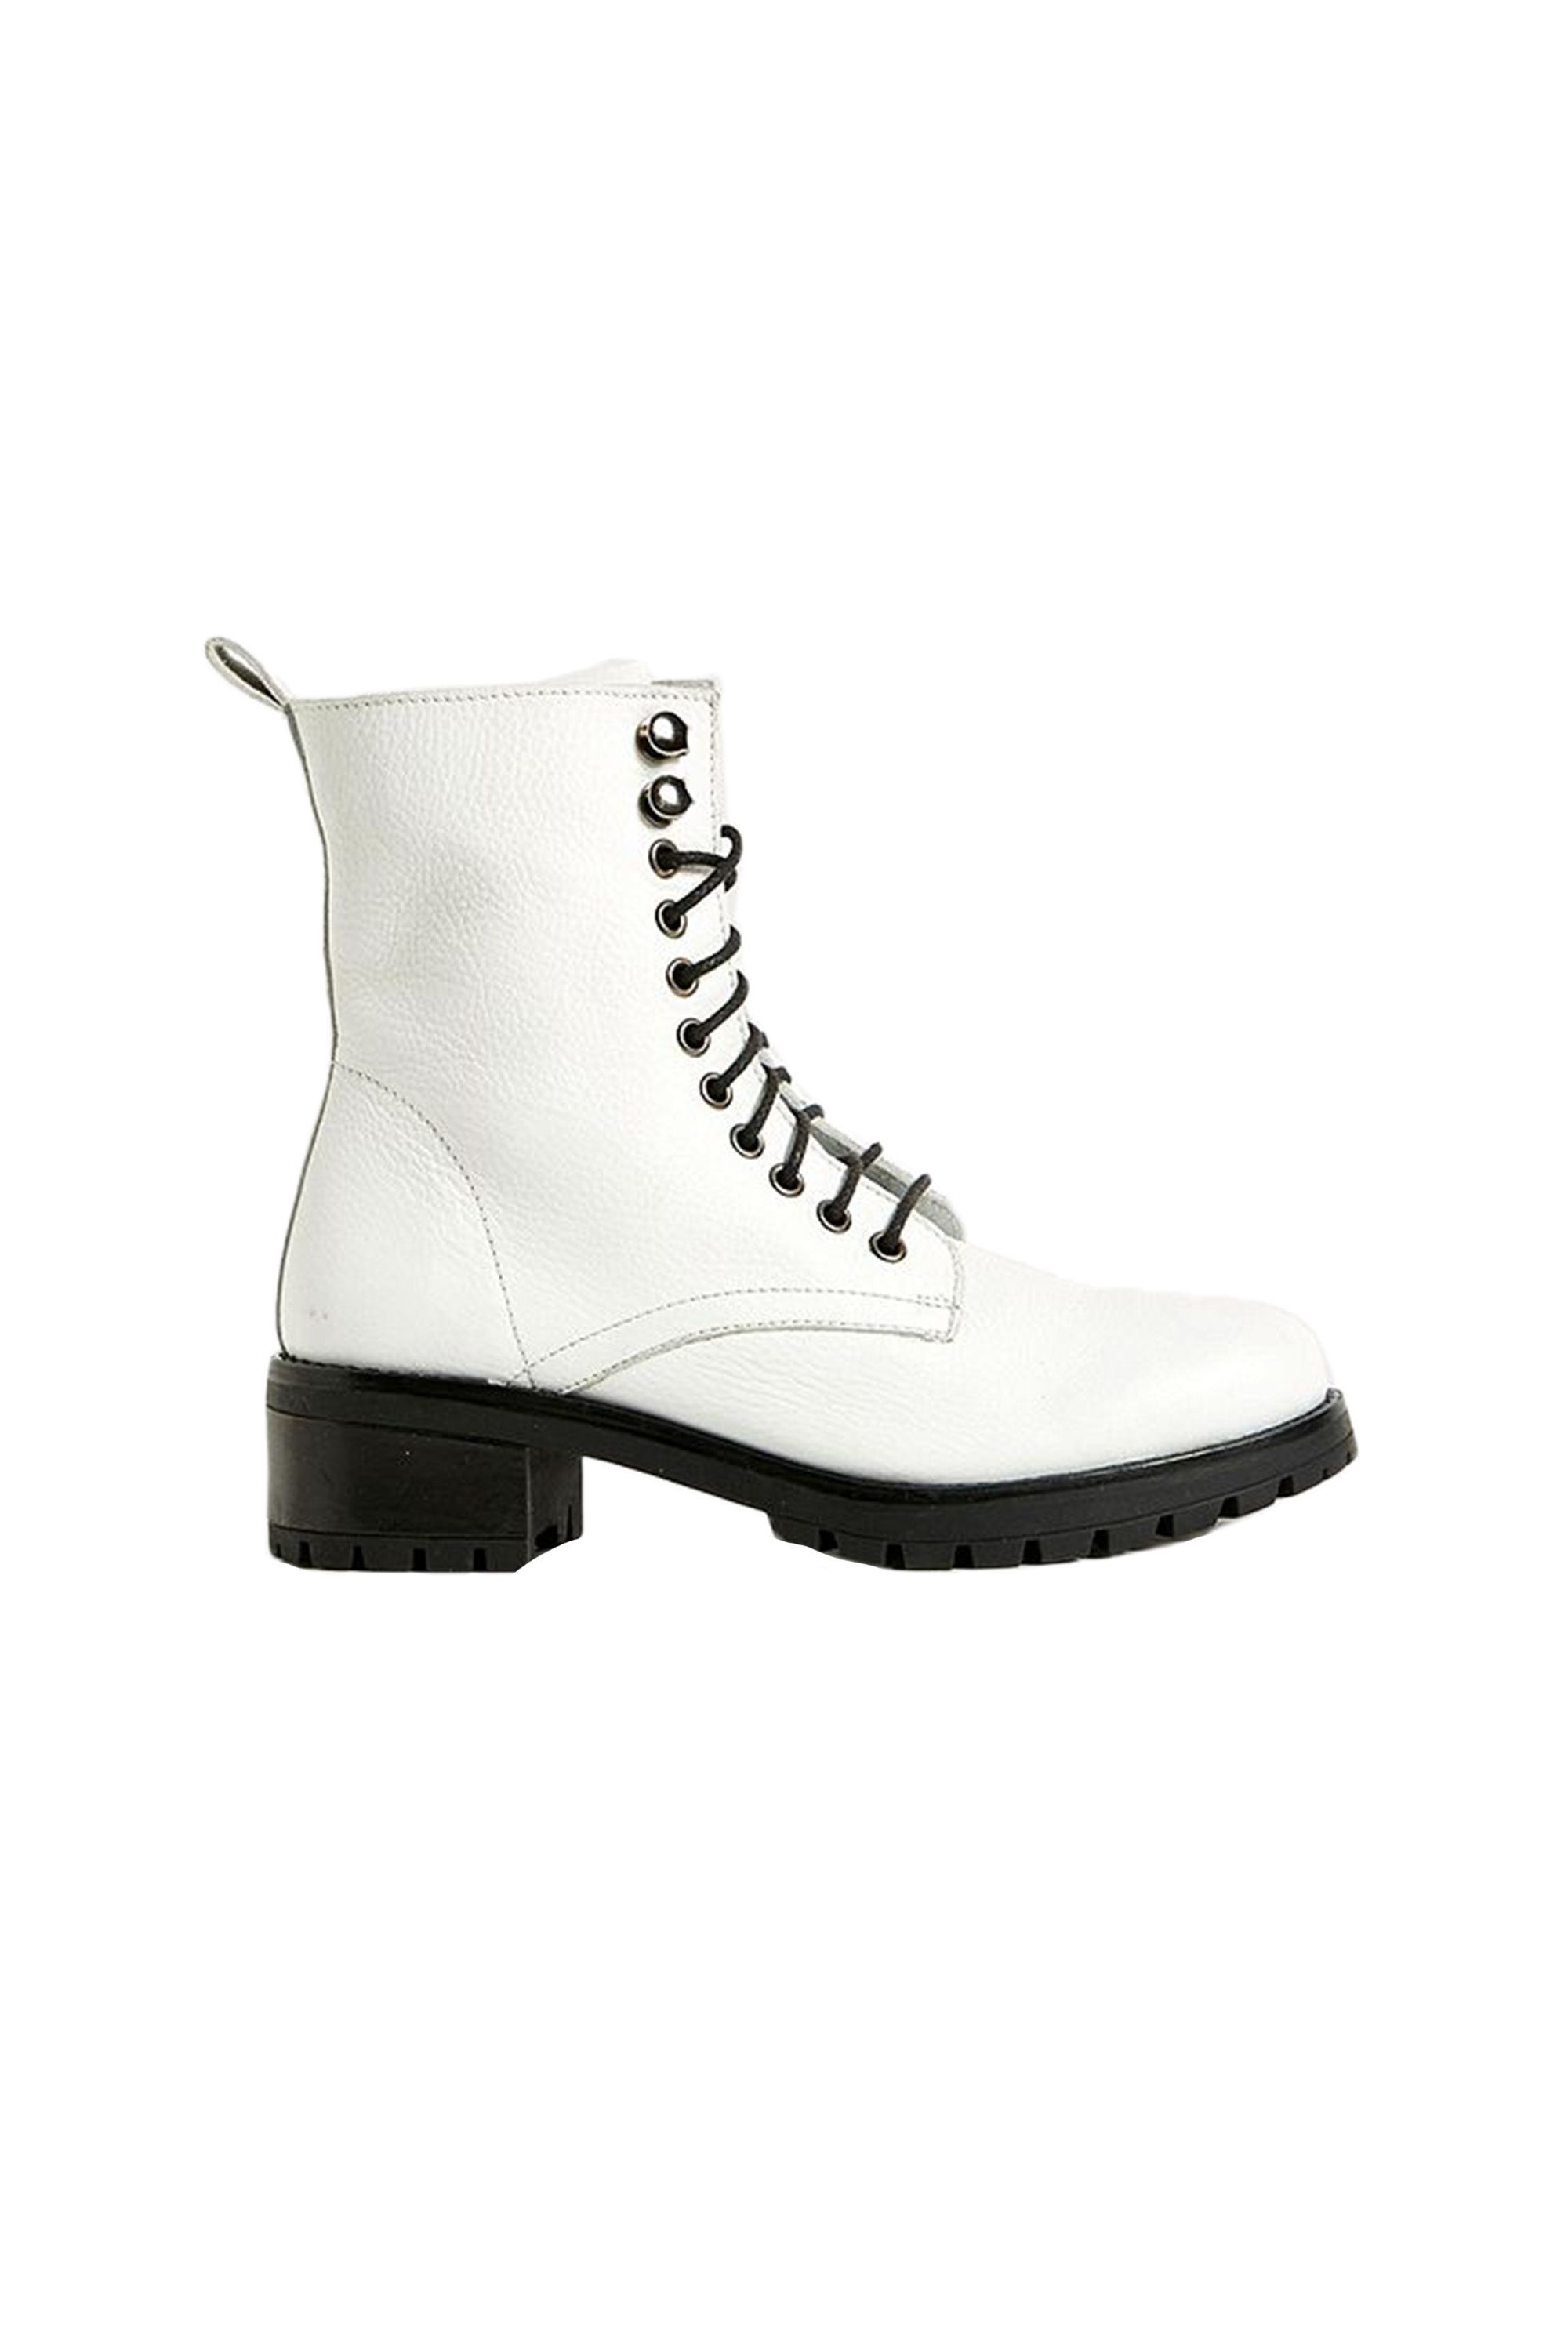 topshop artist lace up boots